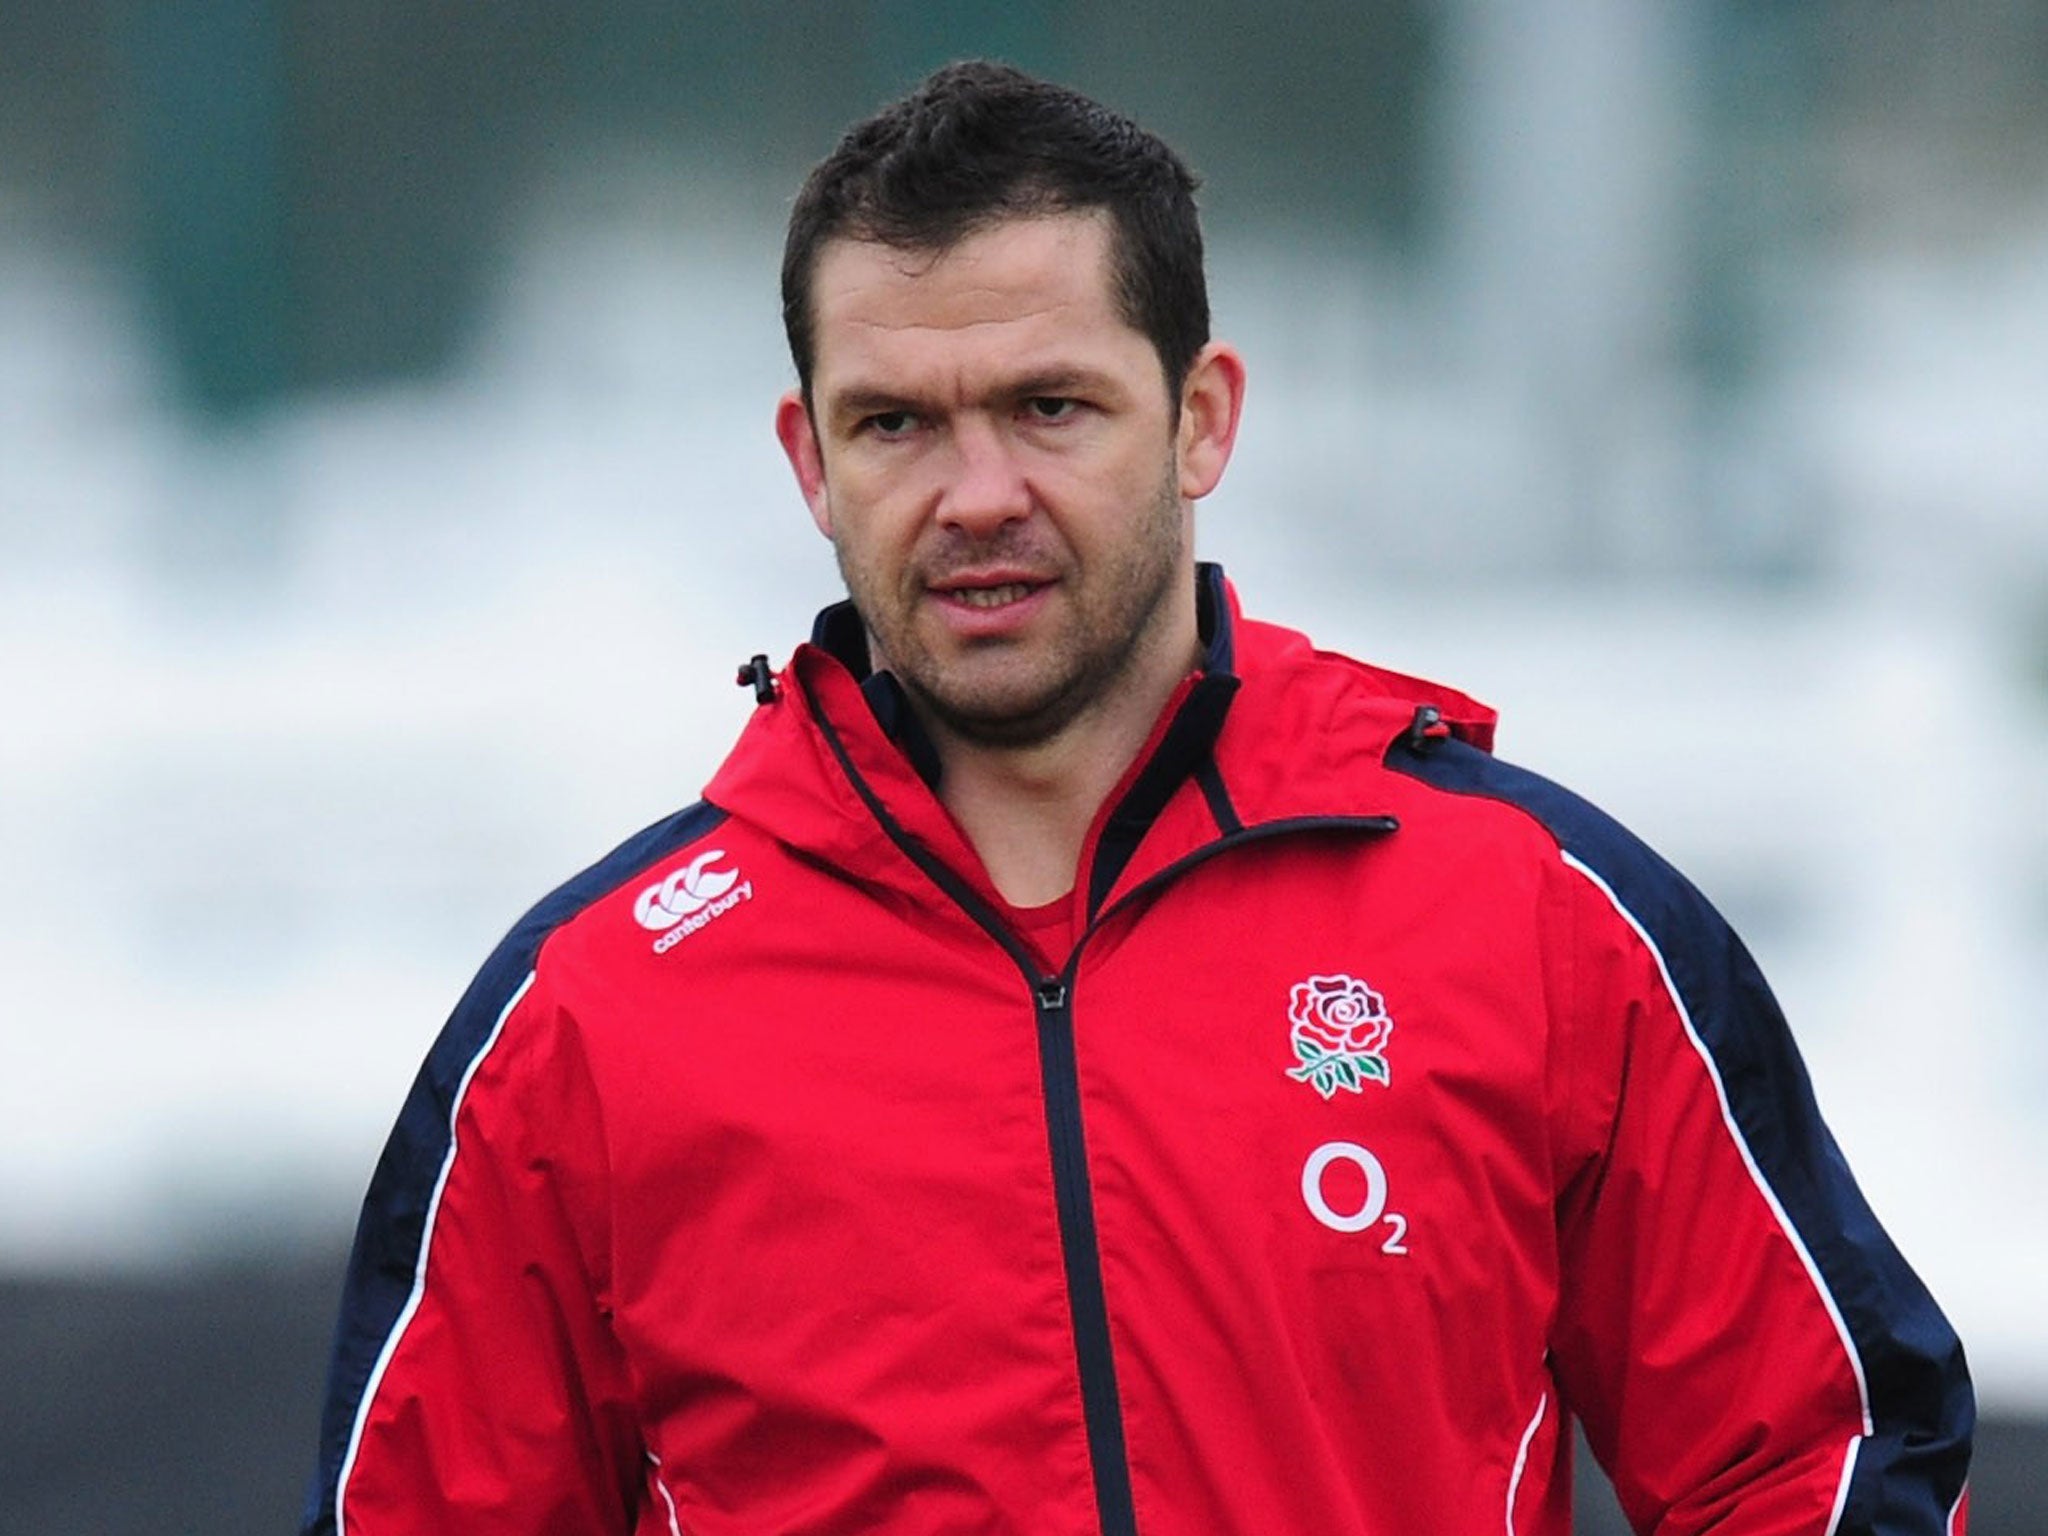 andy farrell
The England coach was unamused by the remarks from Johnson